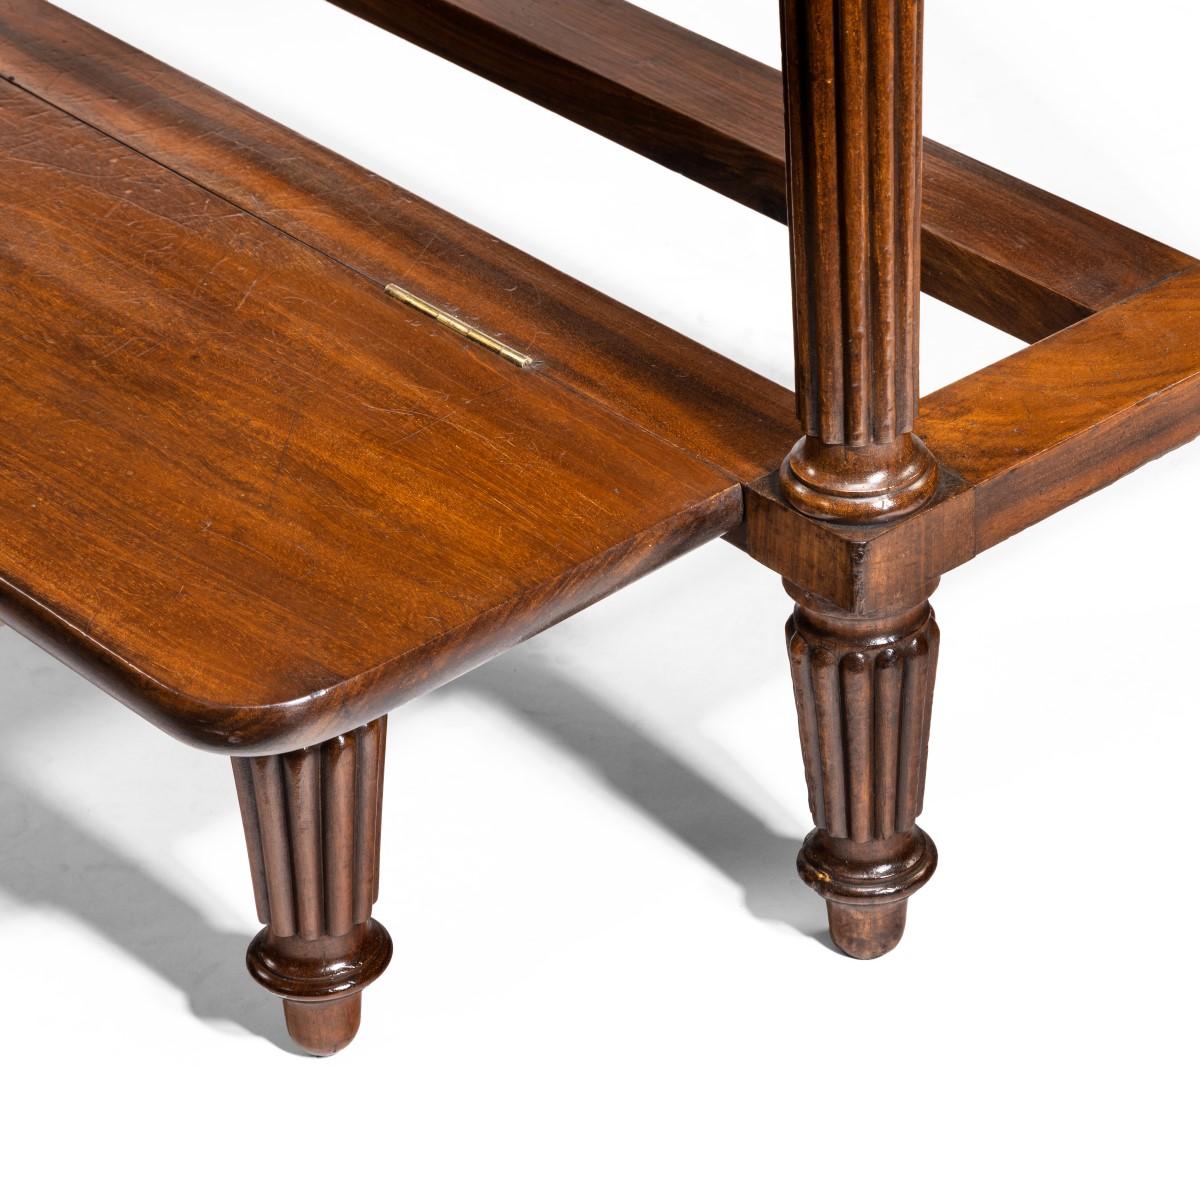 Louis Philippe Mahogany Hall Bench with a Folding Foot-Rest For Sale 4